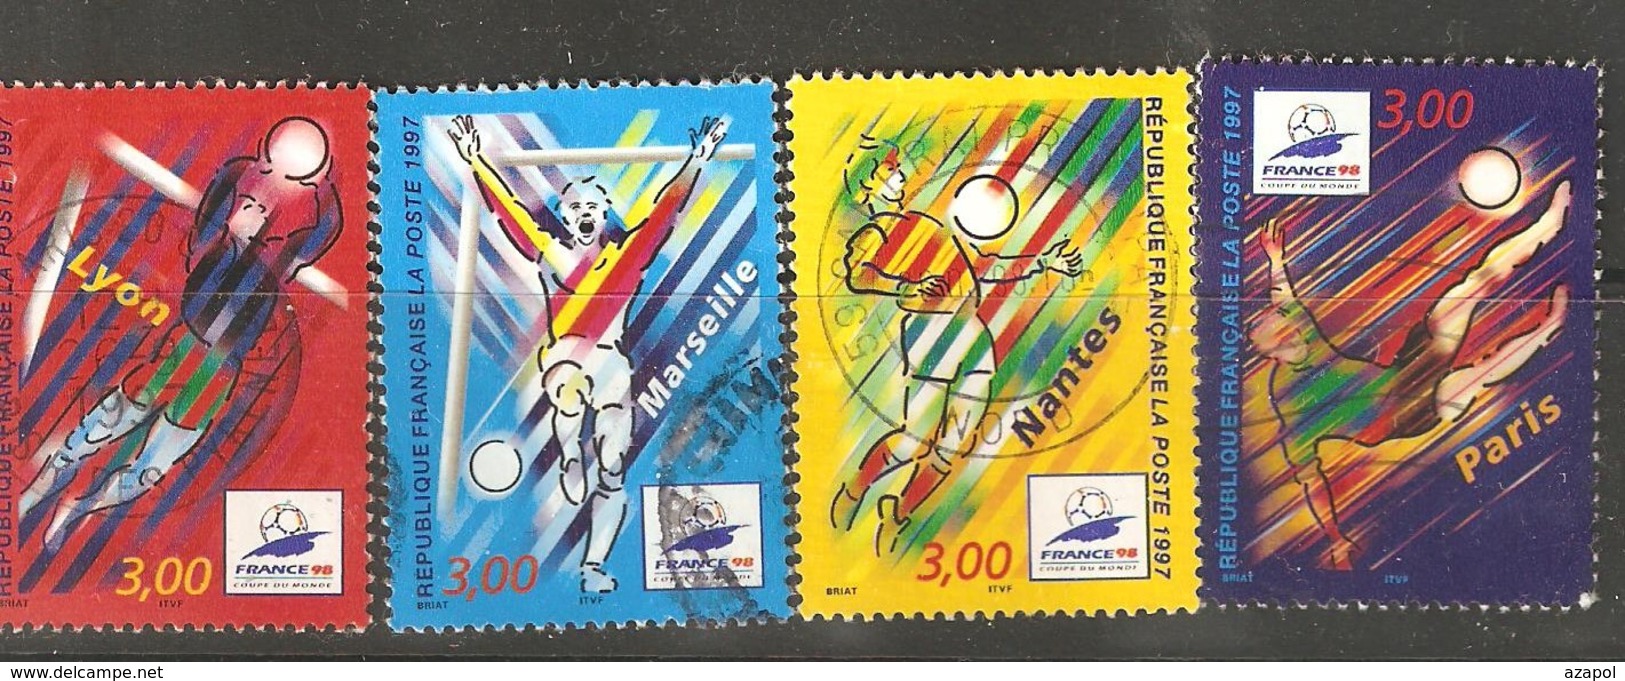 France: Full Set Of 4 Used Stamps, Football World Cup, 1997, Mi#3218-3221 - Usados